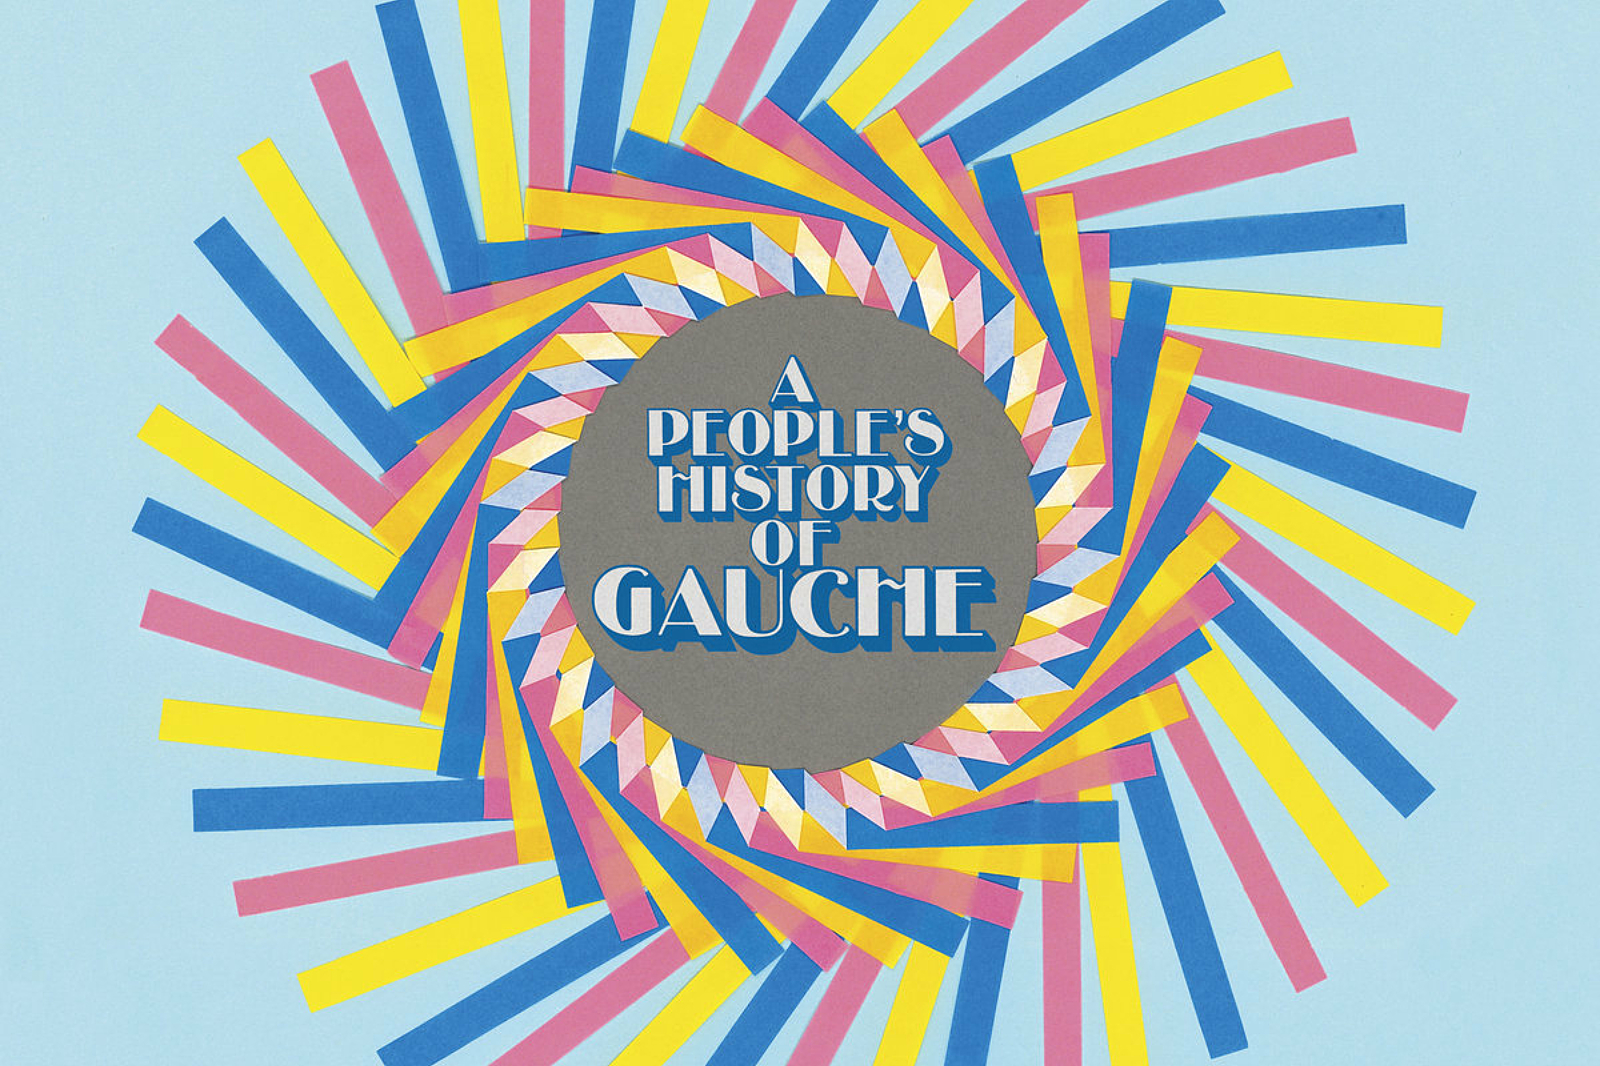 Gauche - A People’s History Of Gauche